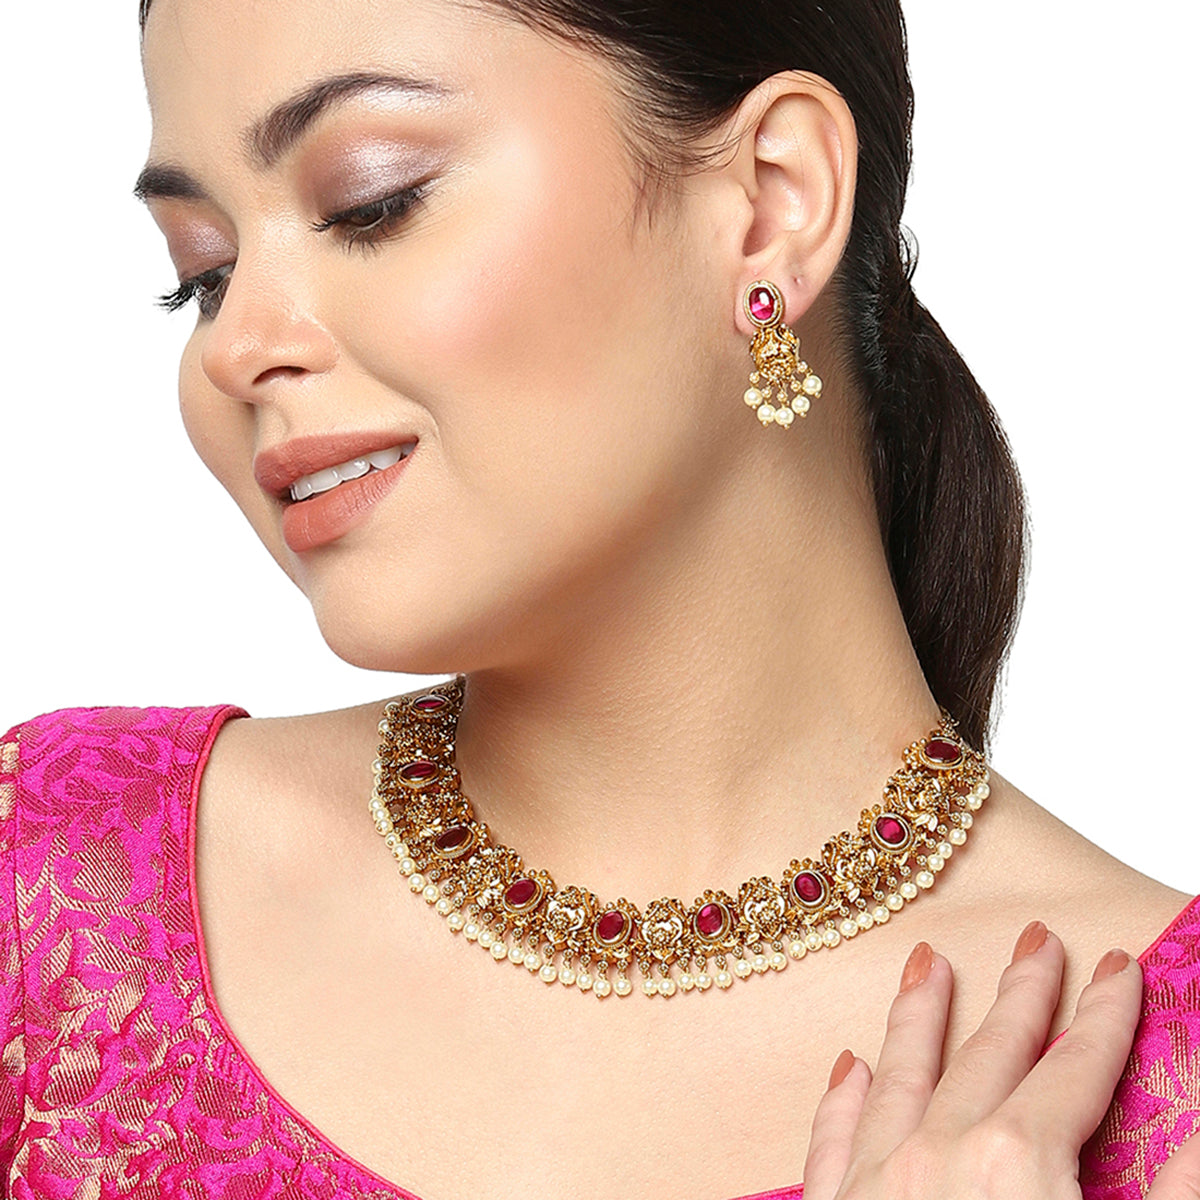 Oval Cut Zircons and Faux Pearls Adorned Brass Gold Toned Ethnic Jewellery Set